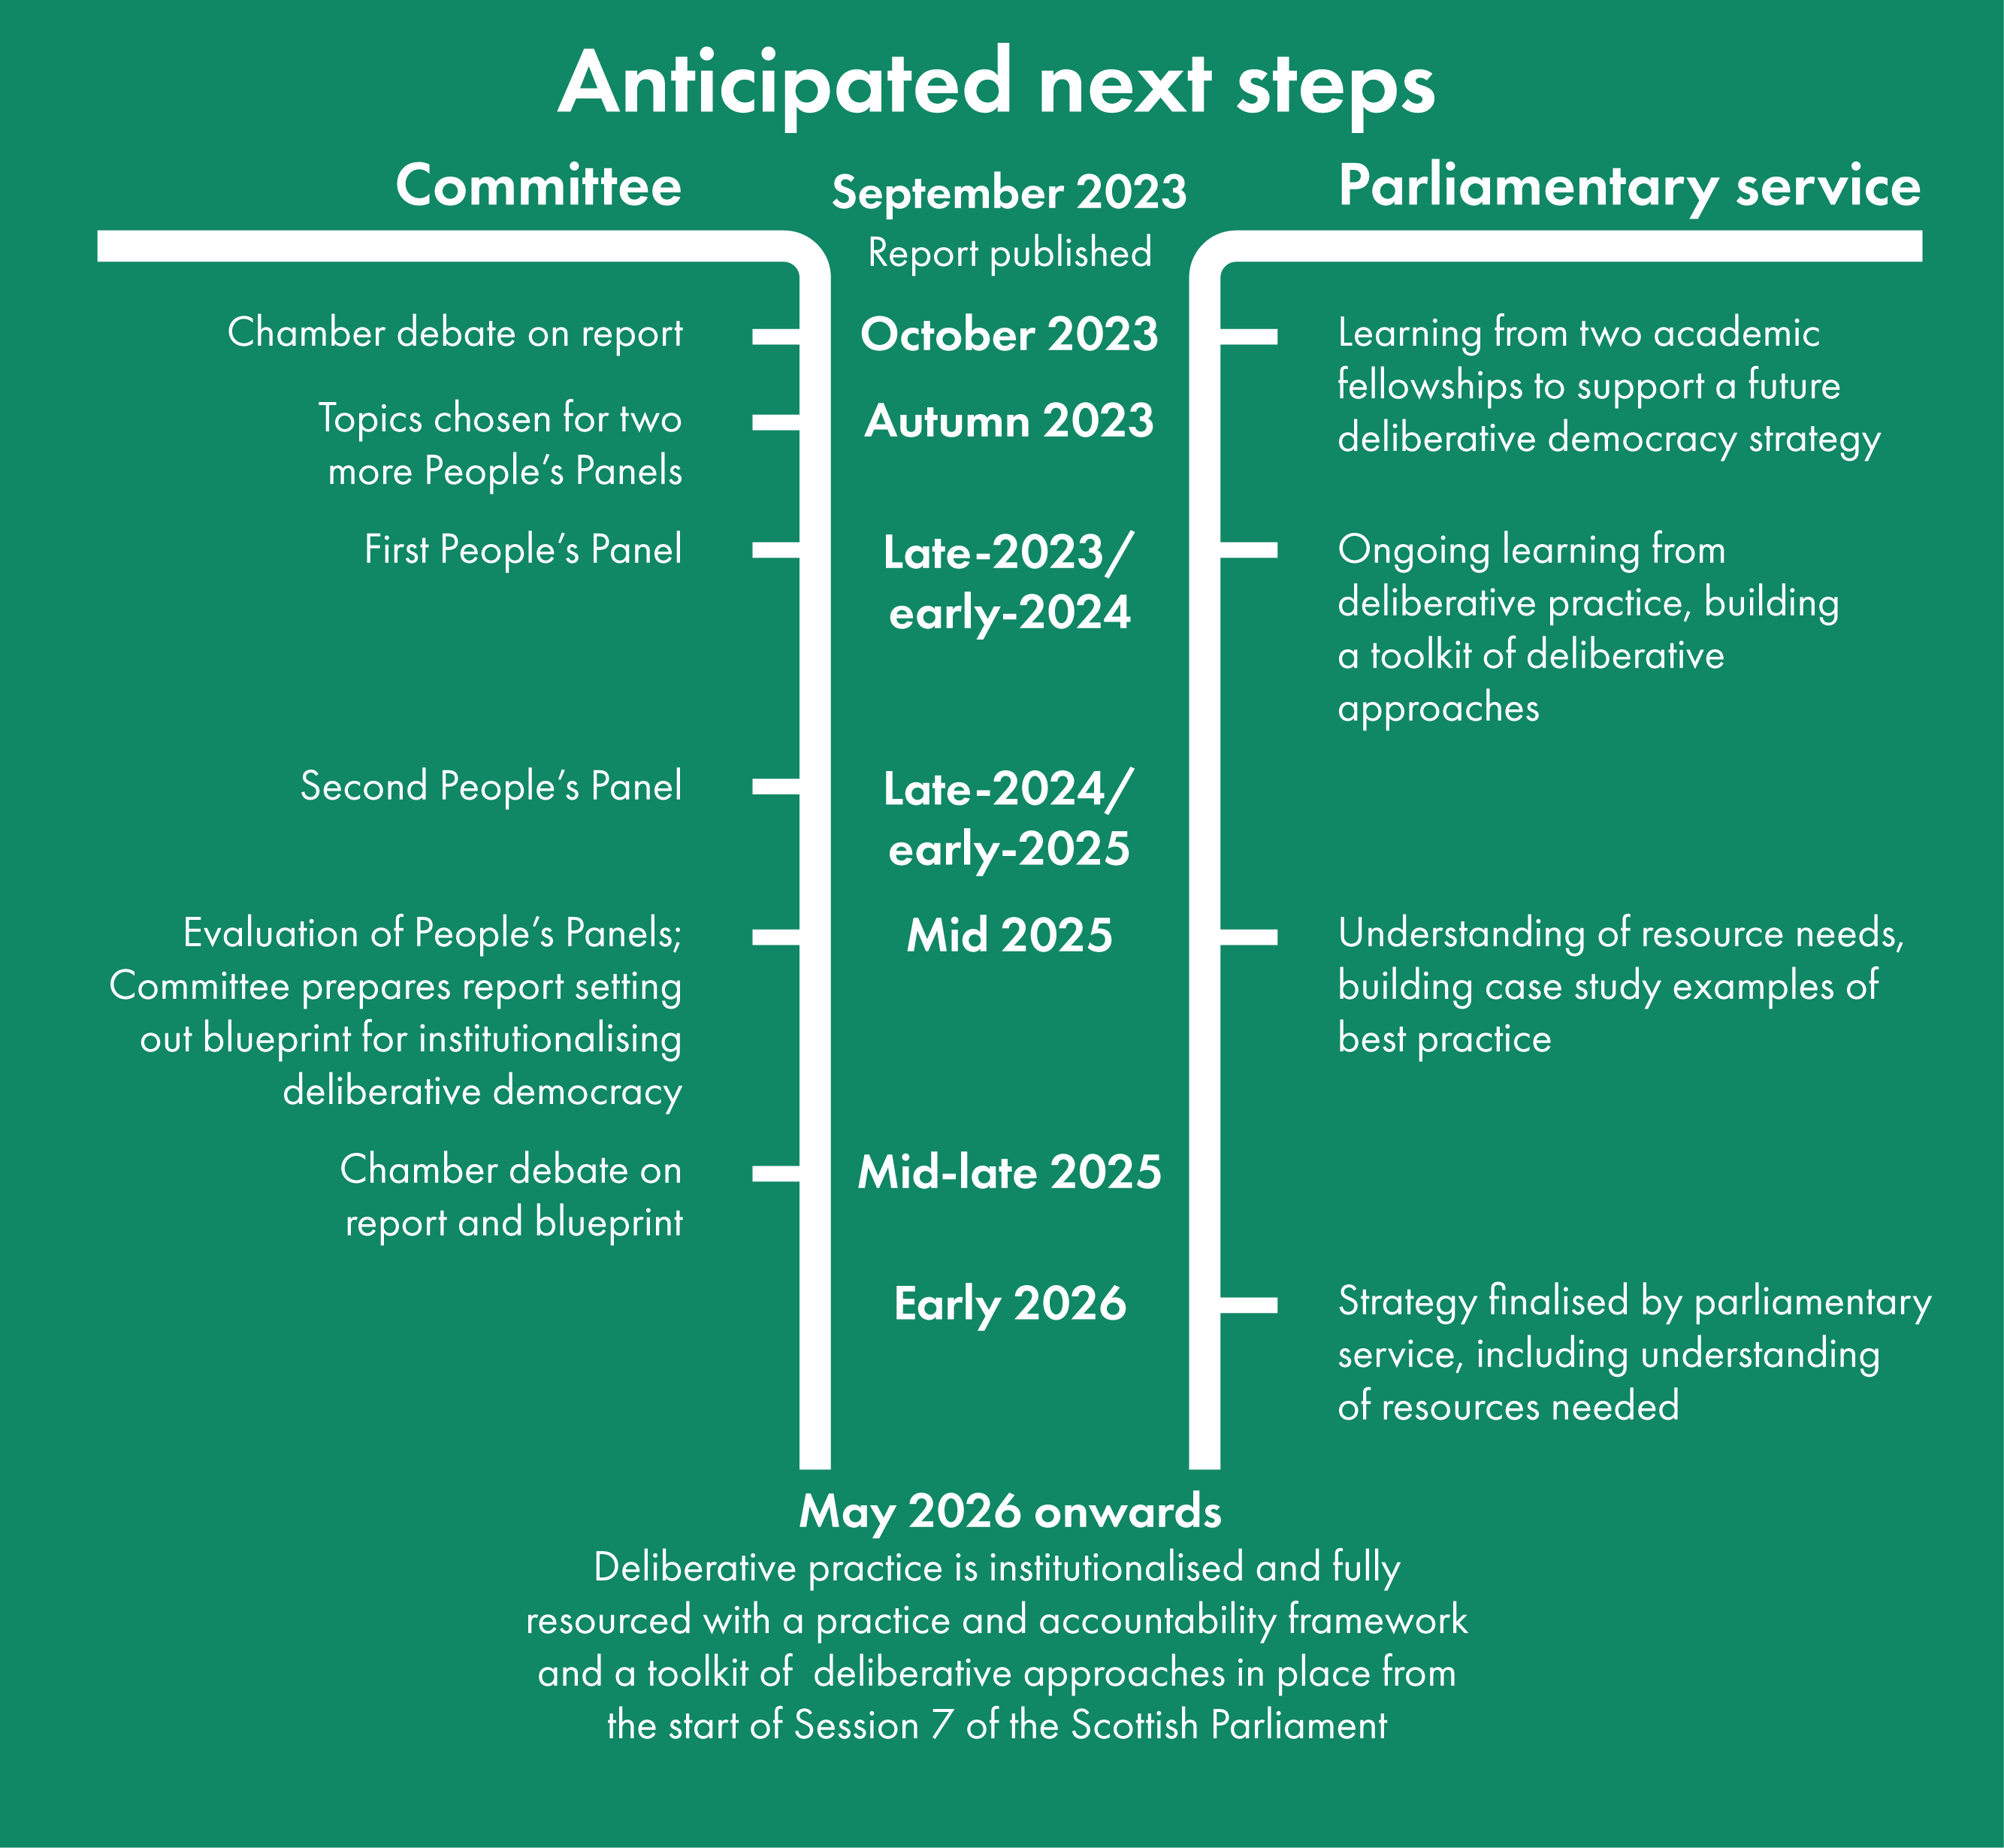 A timeline of the anticipated next steps of the People's panels recommendations. Chamber debate on this report, along with learning from two academic fellowships to support a future deliberative democracy strategy, October 2023. Topics chosen for two more People’s panels in Autumn 2023. Seconds People’s panel planned for late 2024/early 2025. Mid 2025 there will be an evaluation of People’s panel; Committees to prepare report setting out blueprint for institutionalising deliberative democracy along with parliament services understanding of resources needs, building case study examples of best practice. Mid to late 2025 there will be a chamber debate on report and blueprint and in early 2026 there will be strategy finalised by parliamentary service, including understanding of resources needed. From May 2026 onwards there will be a deliberative practice institutionalised and fully resourced with a practice and accountability framework and a toolkit of deliberative approaches in place from the start on Session 7 of the Scottish Parliament.